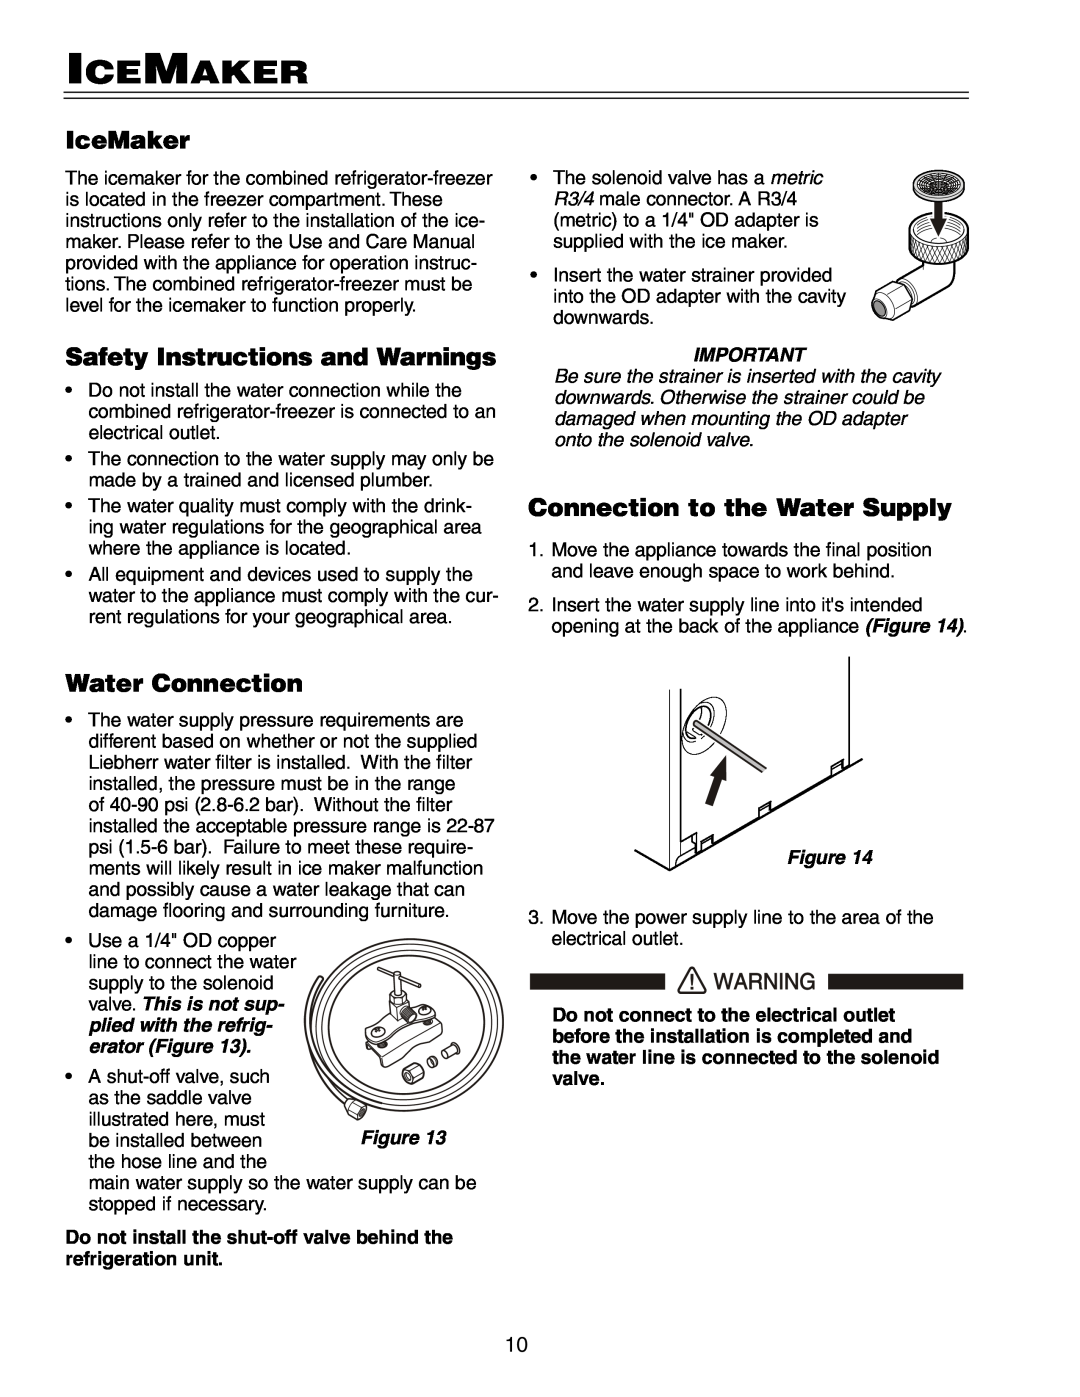 Liebherr HCB 2062, HC 2062 IceMaker, Safety Instructions and Warnings, Connection to the Water Supply, Water Connection 